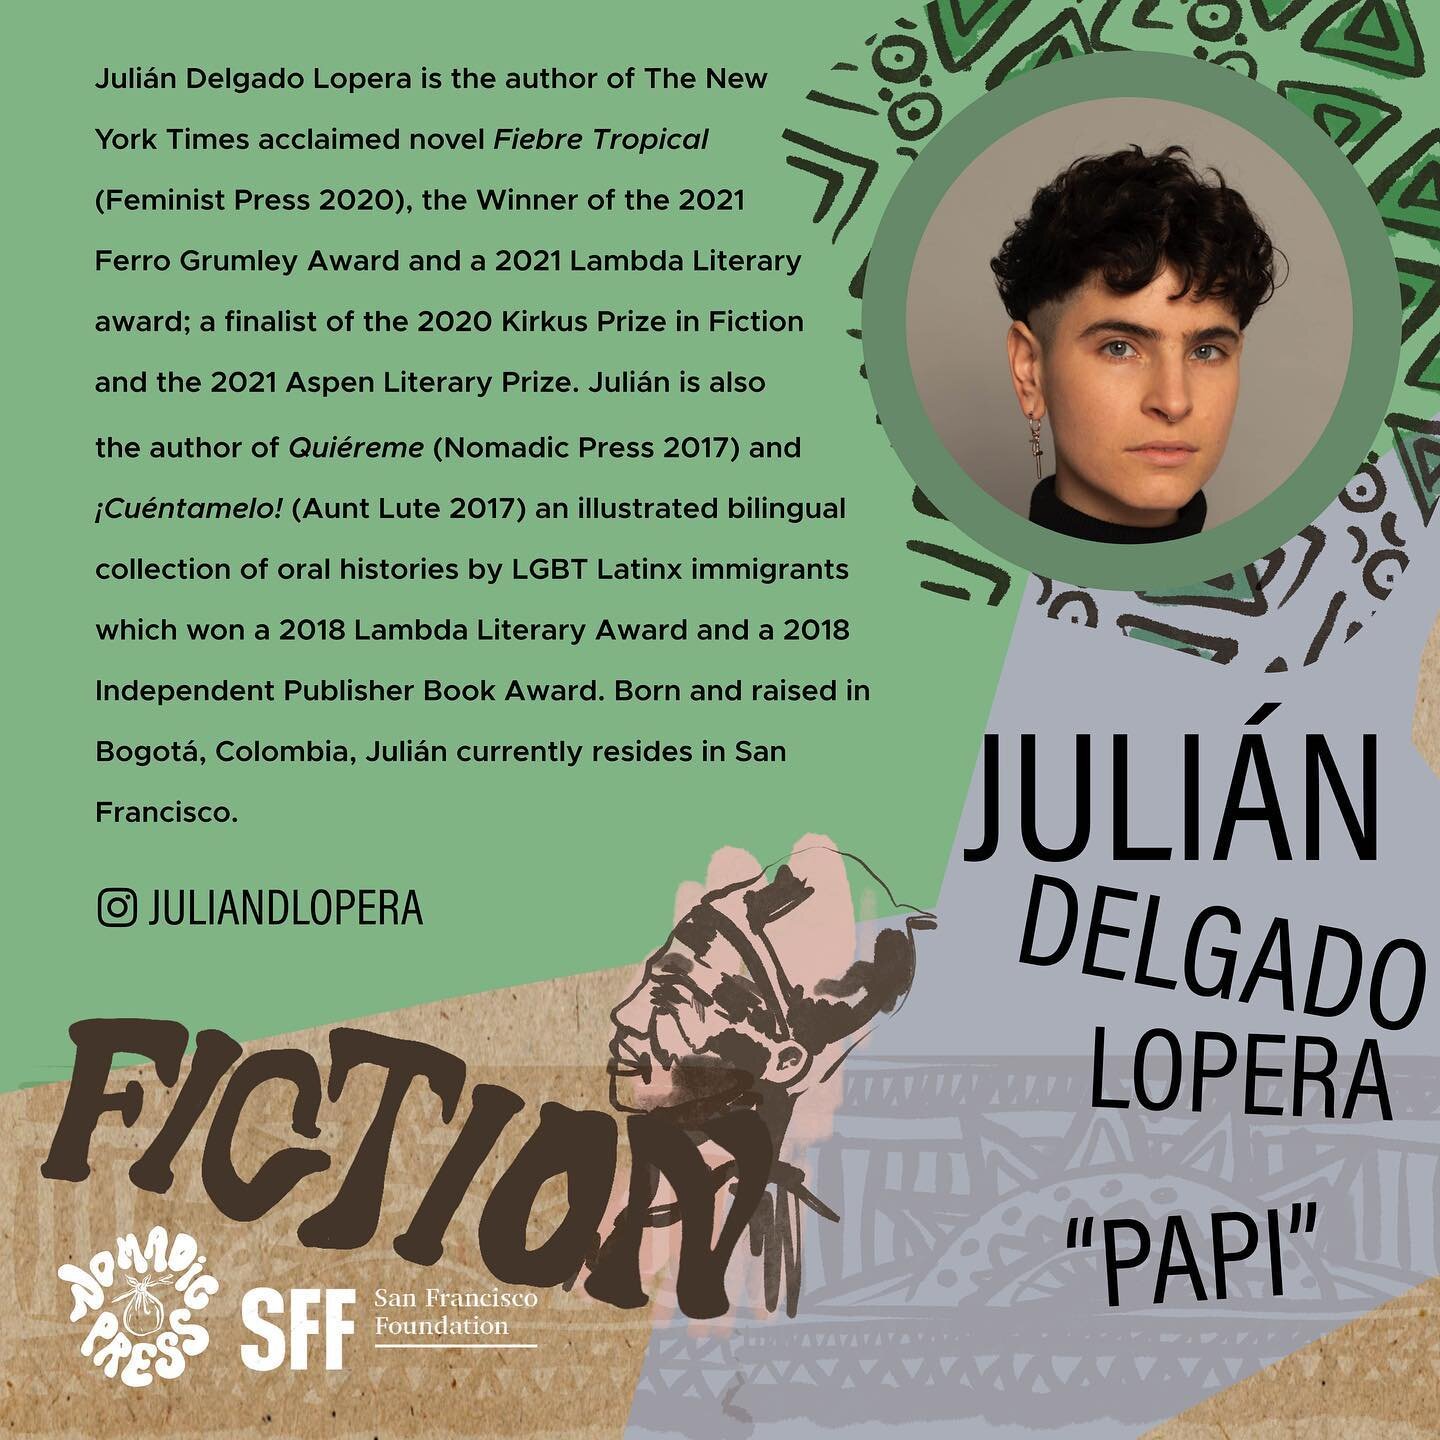 Join us in congratulating Juli&aacute;n Delgado Lopera for winning the 2023 San Francisco Foundation/Nomadic Press Literary Award in Fiction! Juli&aacute;n will receive $5000 for their novel-in-progress, PAPI&mdash;which blew away judges with its bol